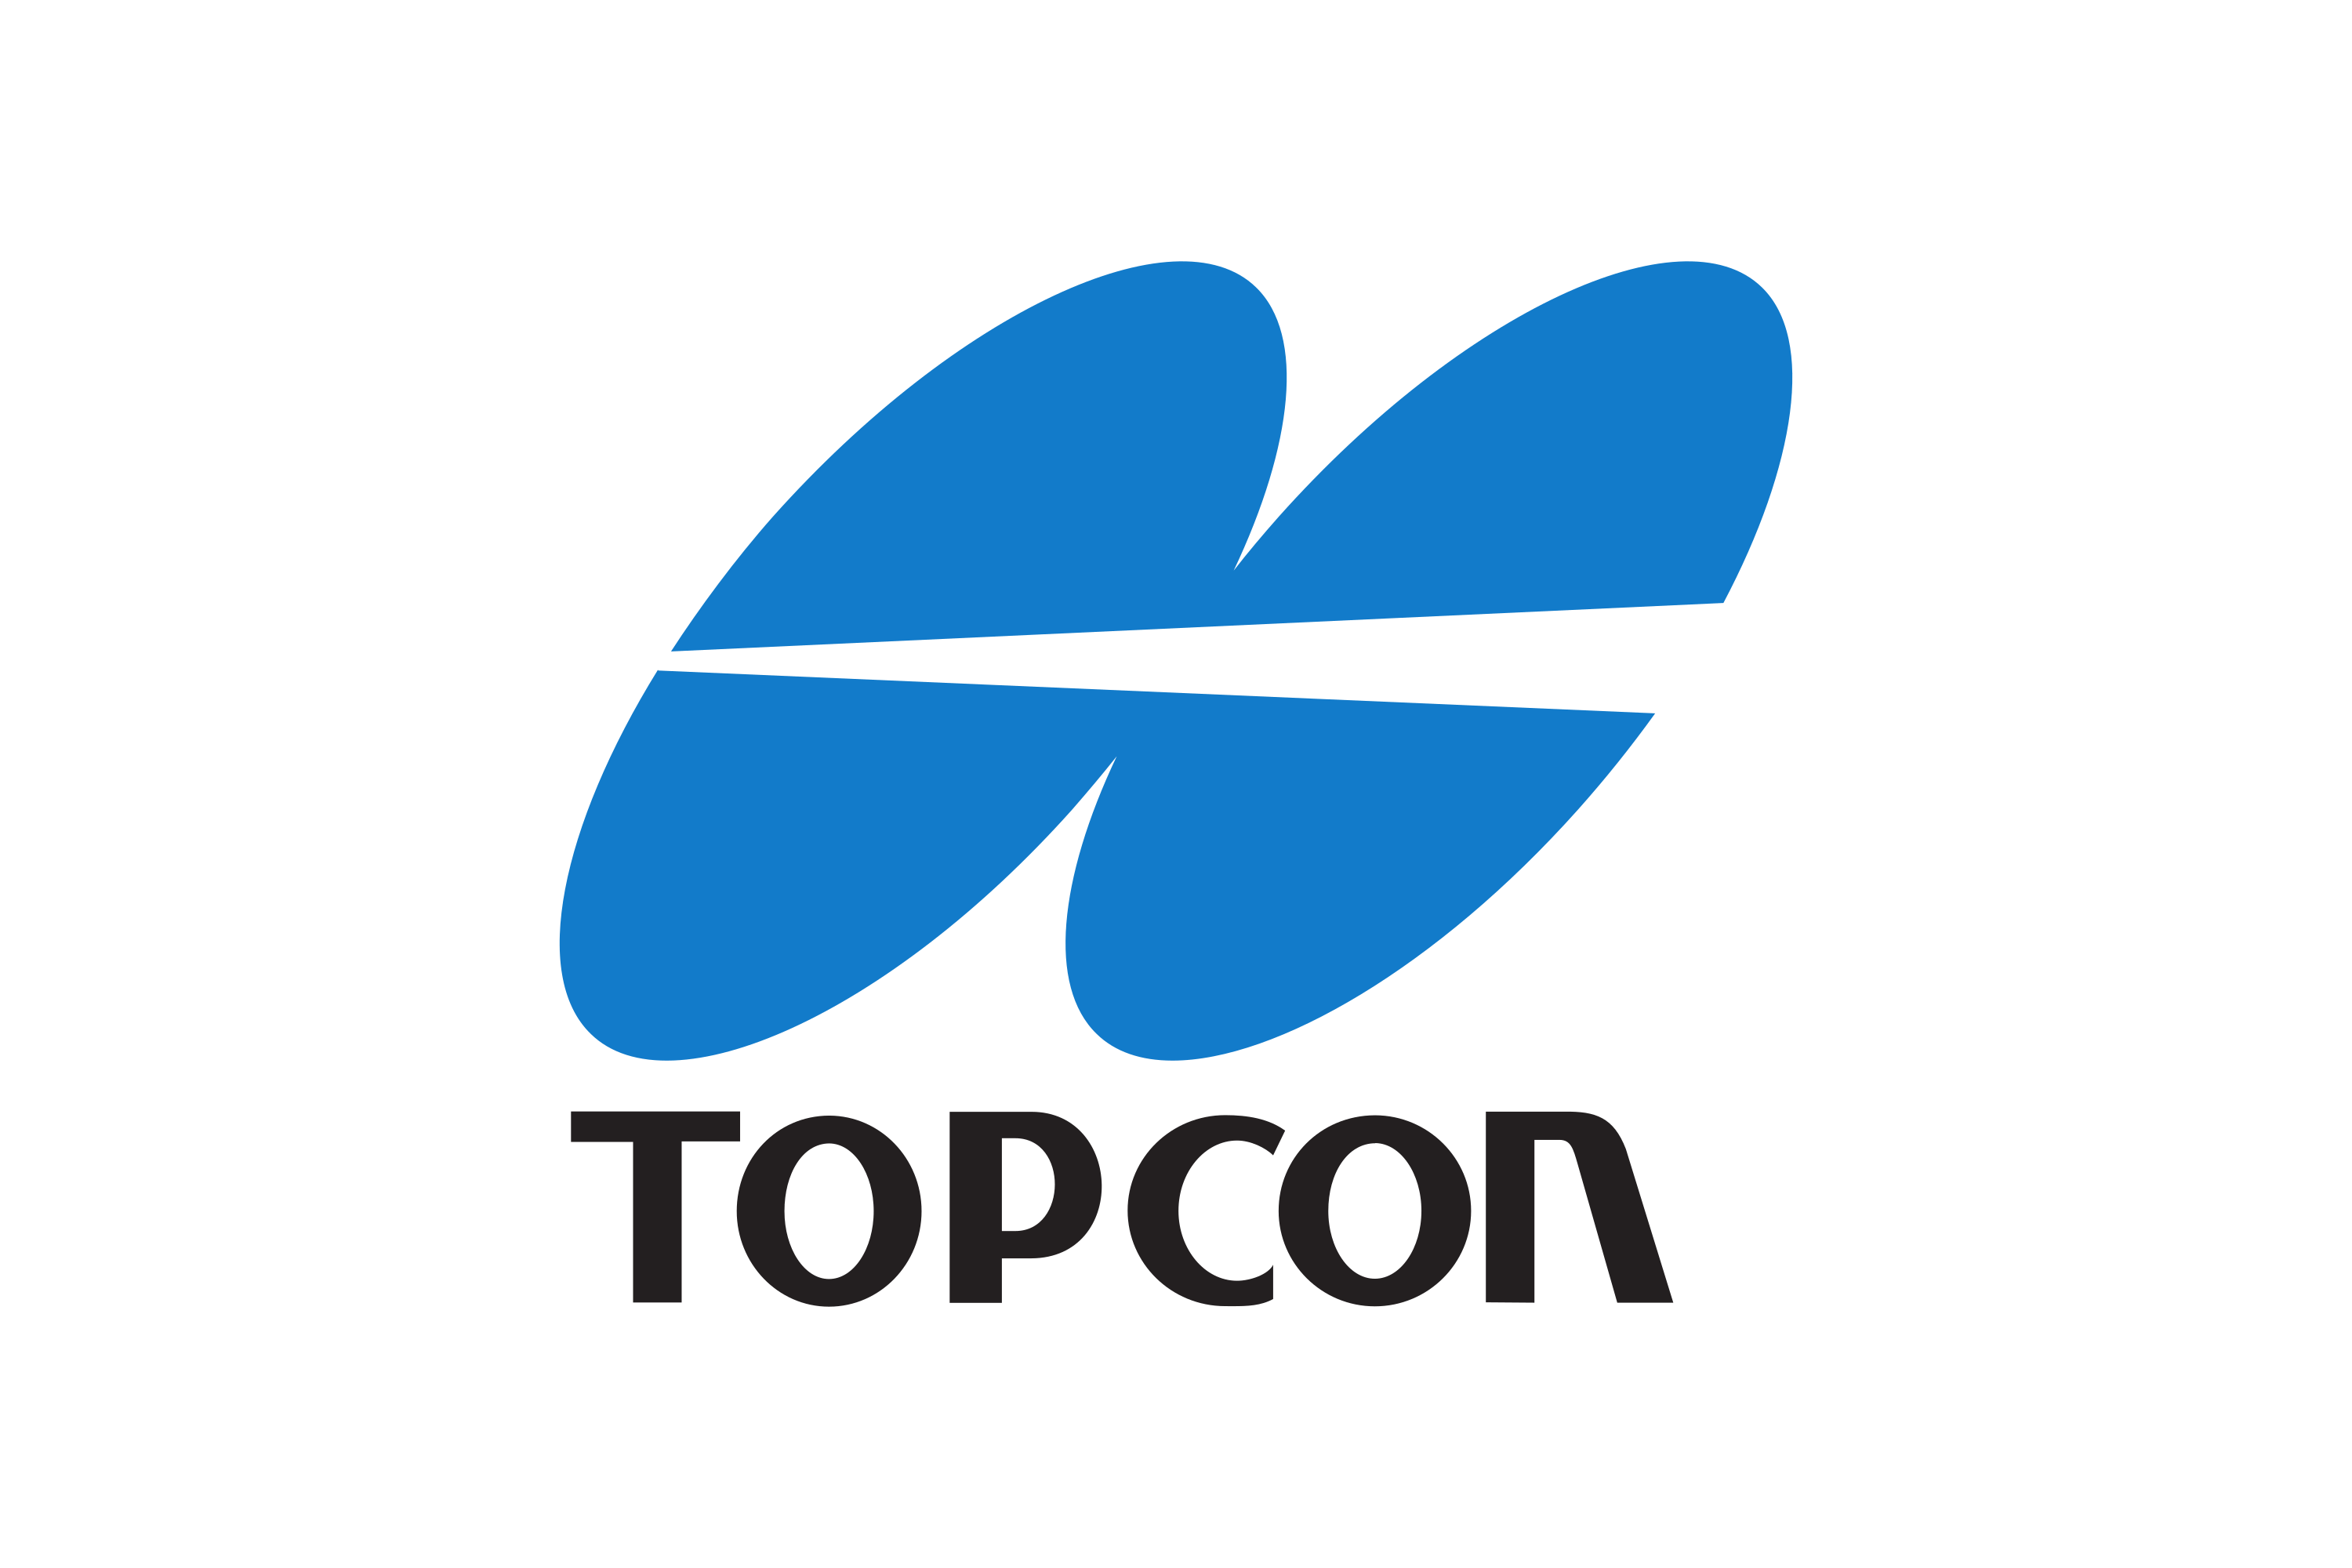 Download Topcon Logo in SVG Vector or PNG File Format - Logo.wine